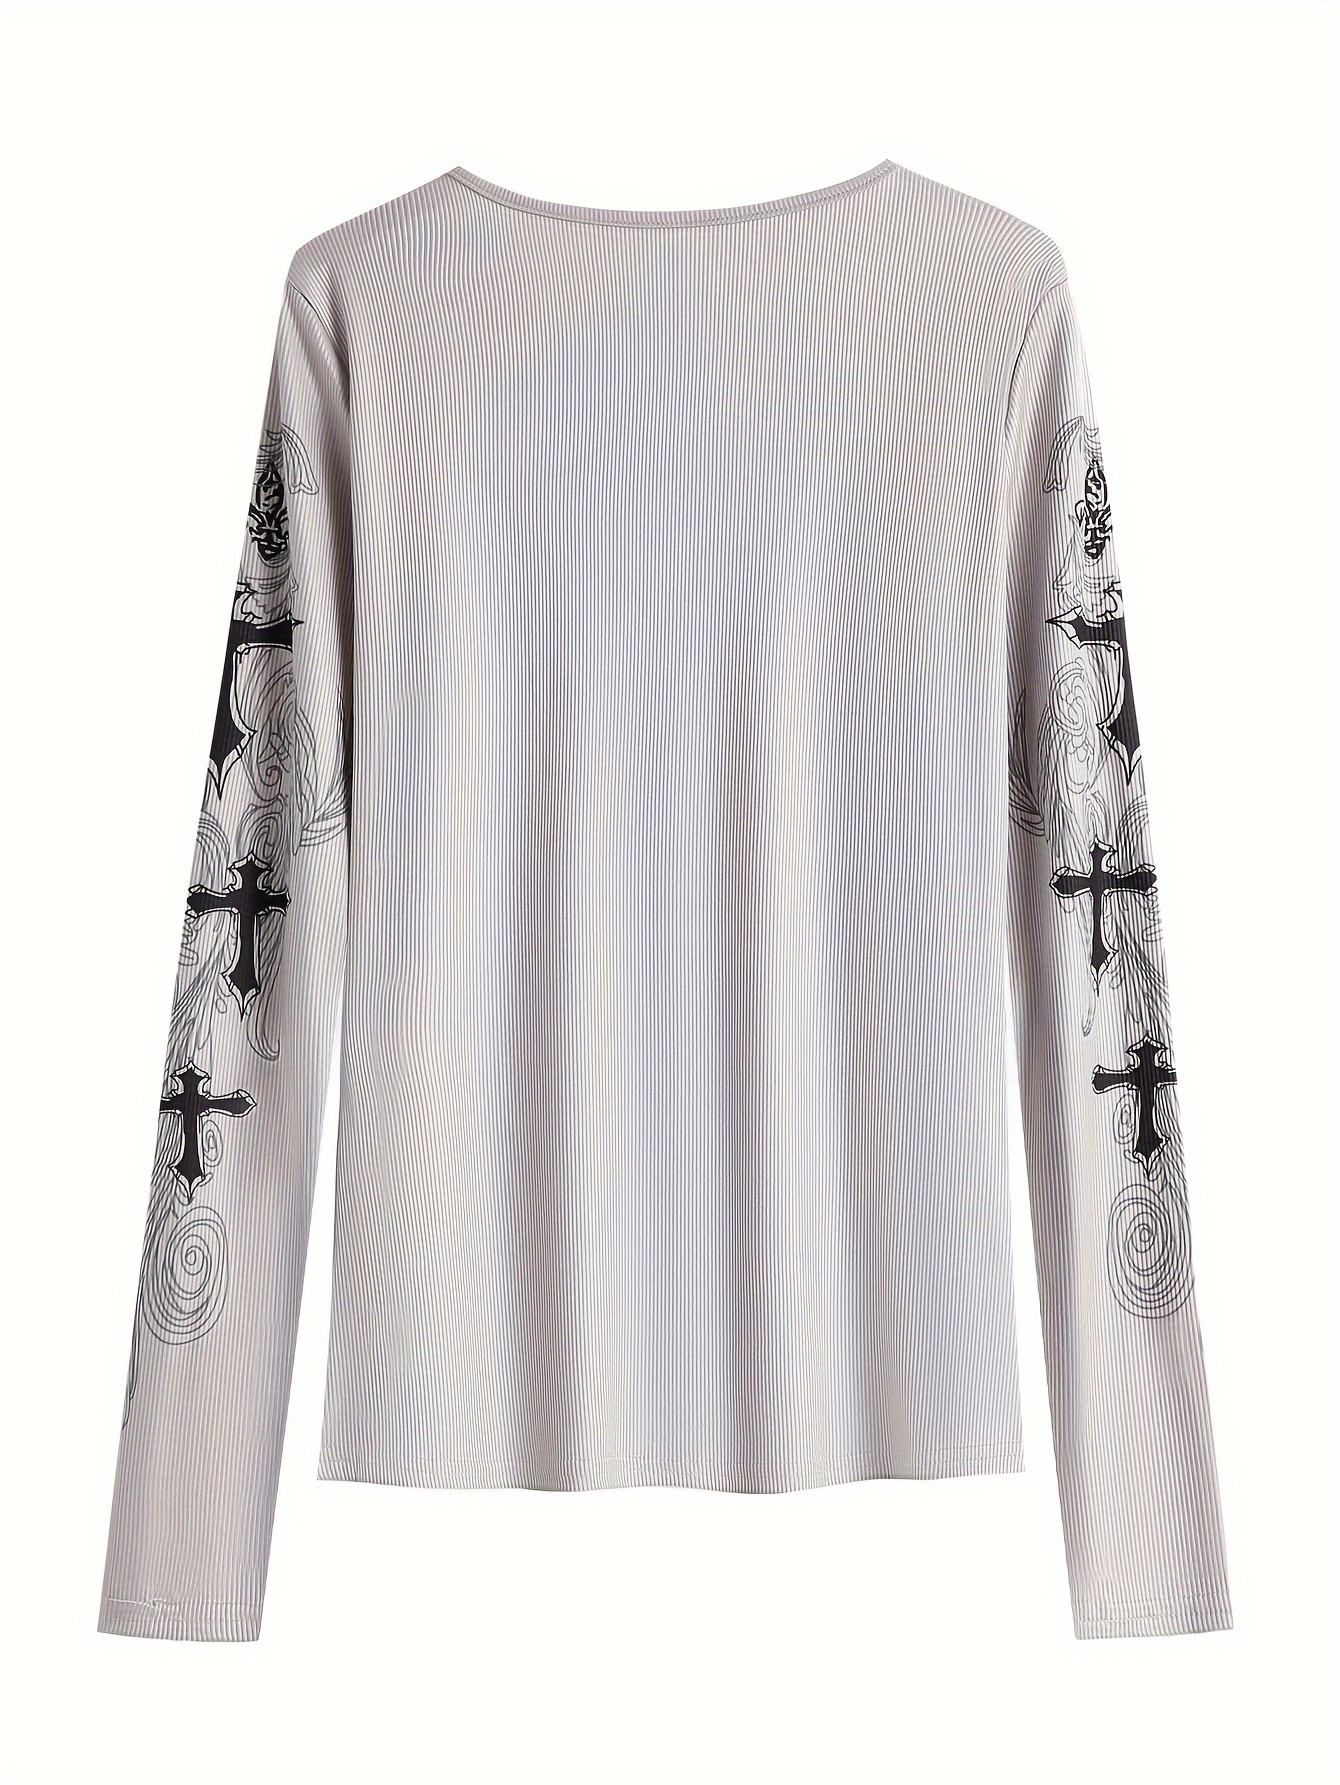 Floral Thermal Shirt Y2K White Waffle Knit Shirt Long, Shop Exile